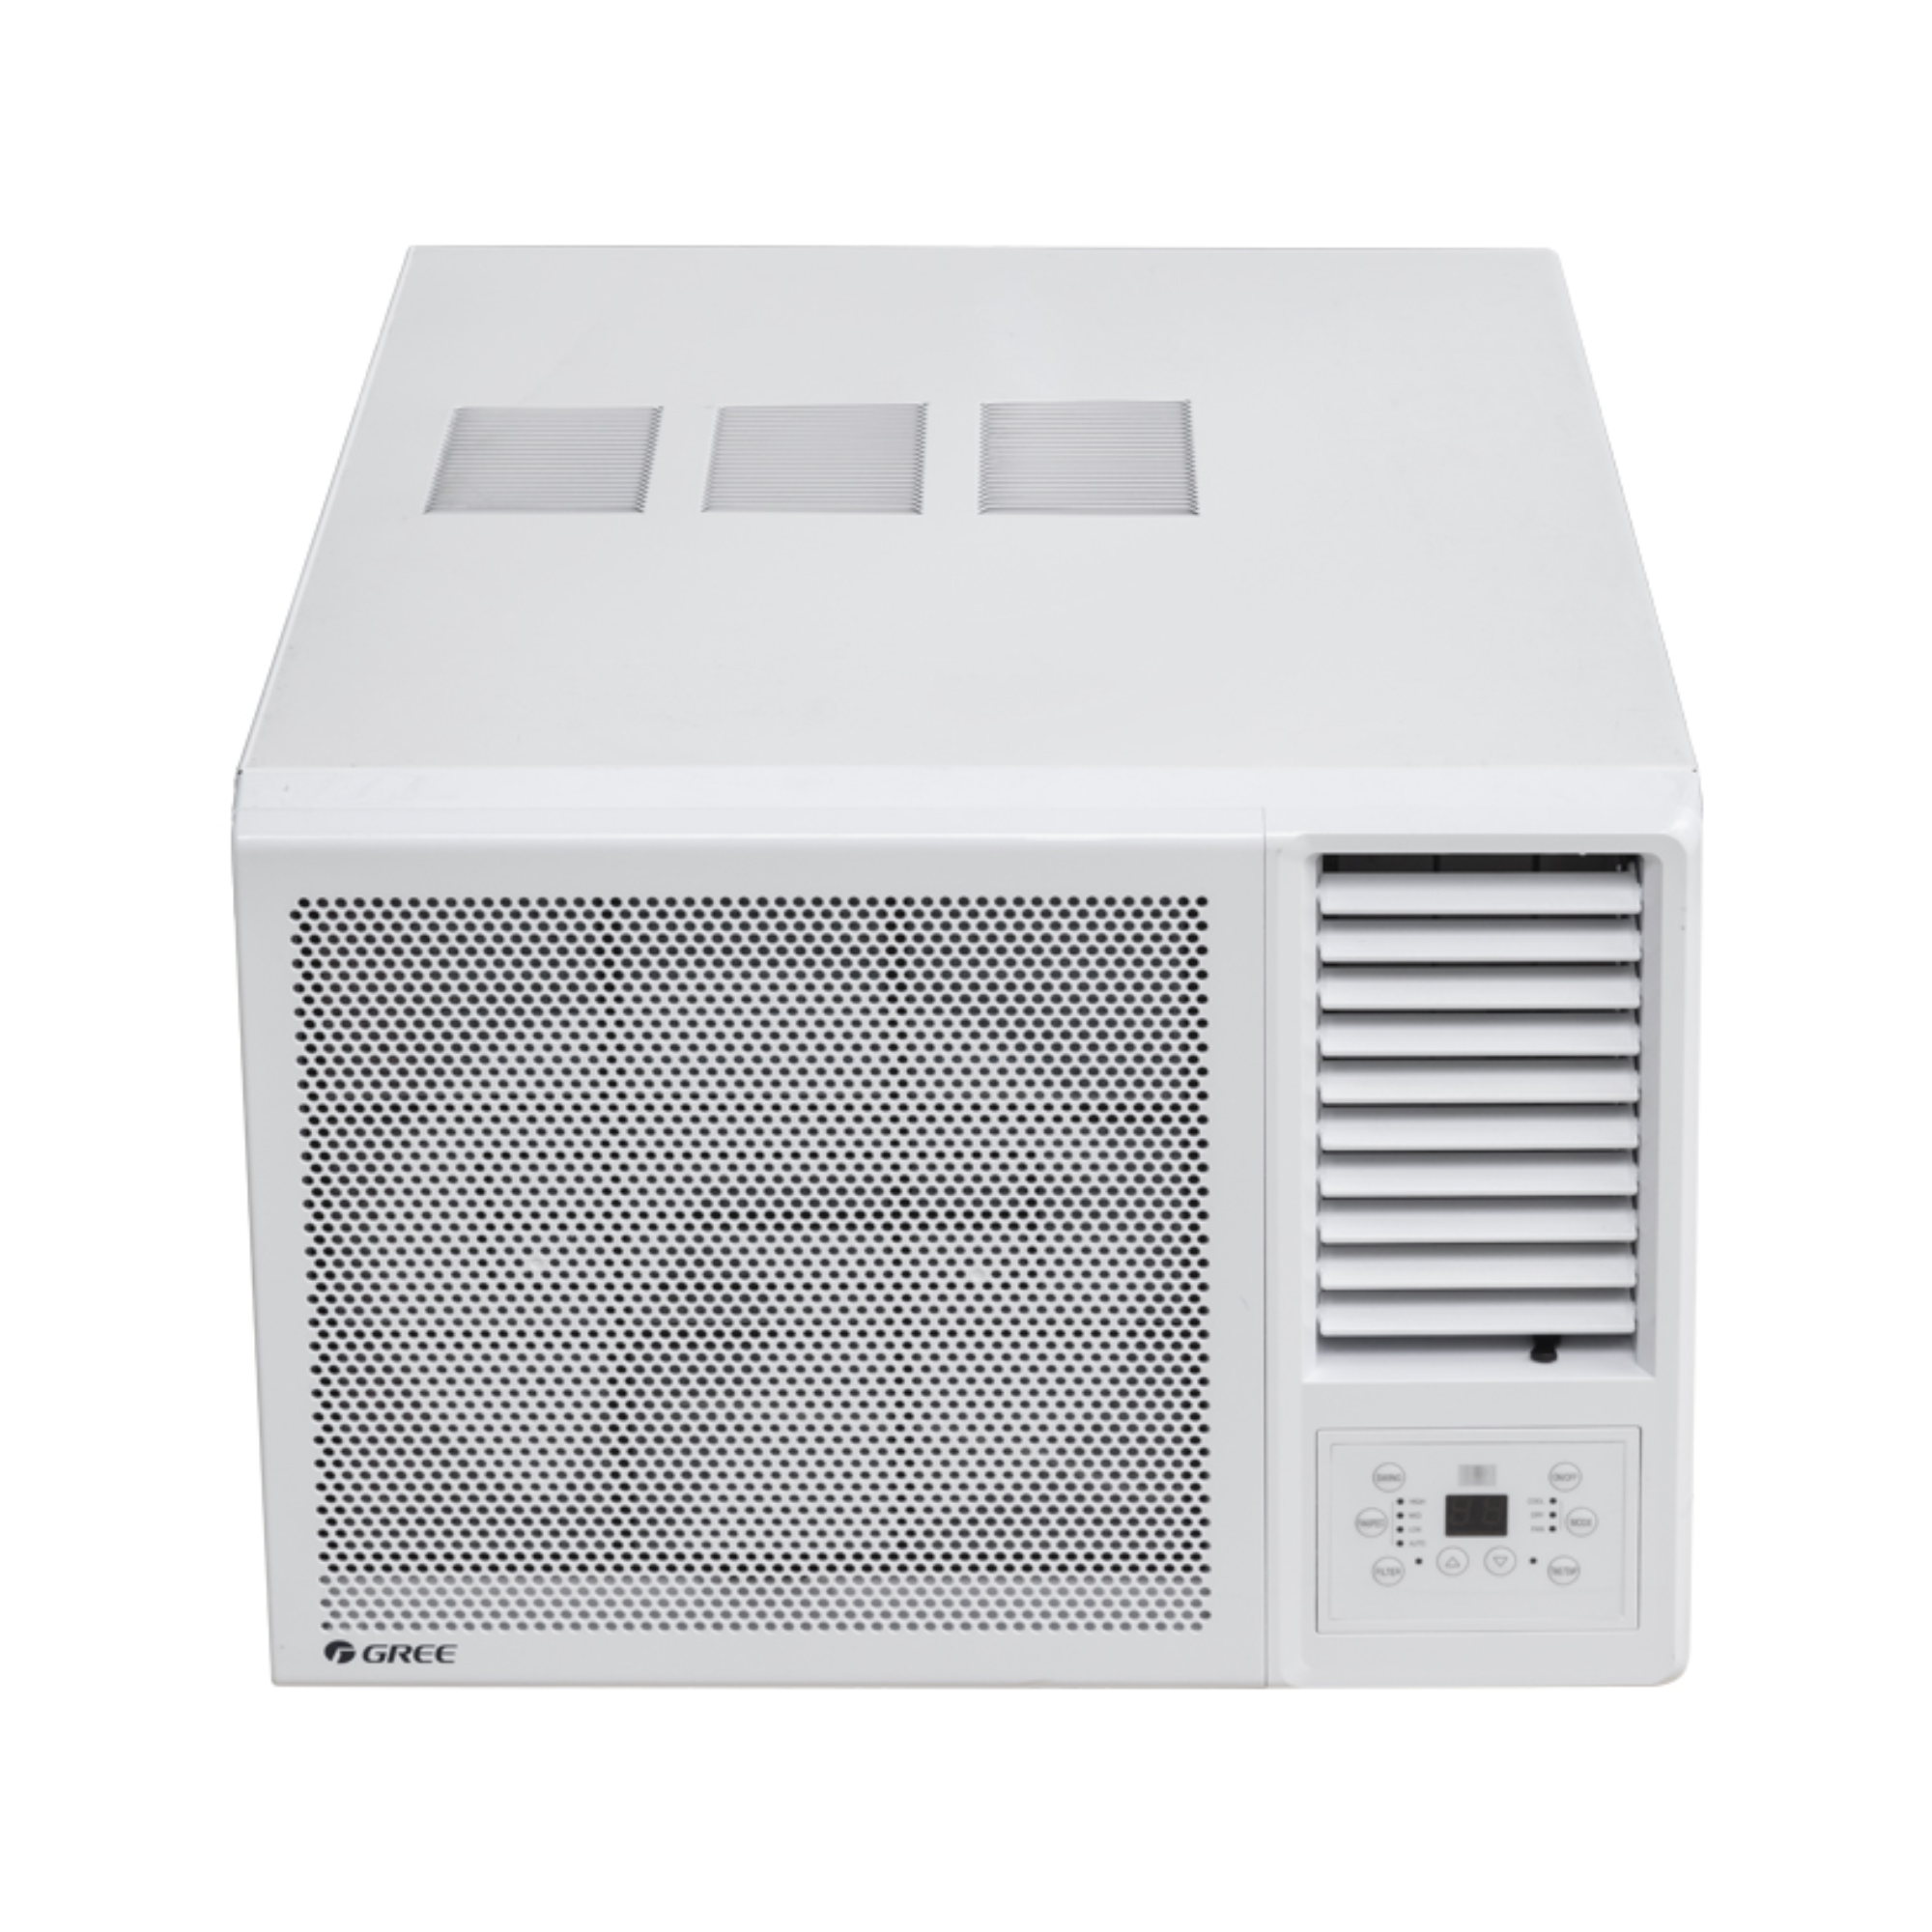 Gree 2.7kW Window Wall Air Conditioner Reverse Cycle